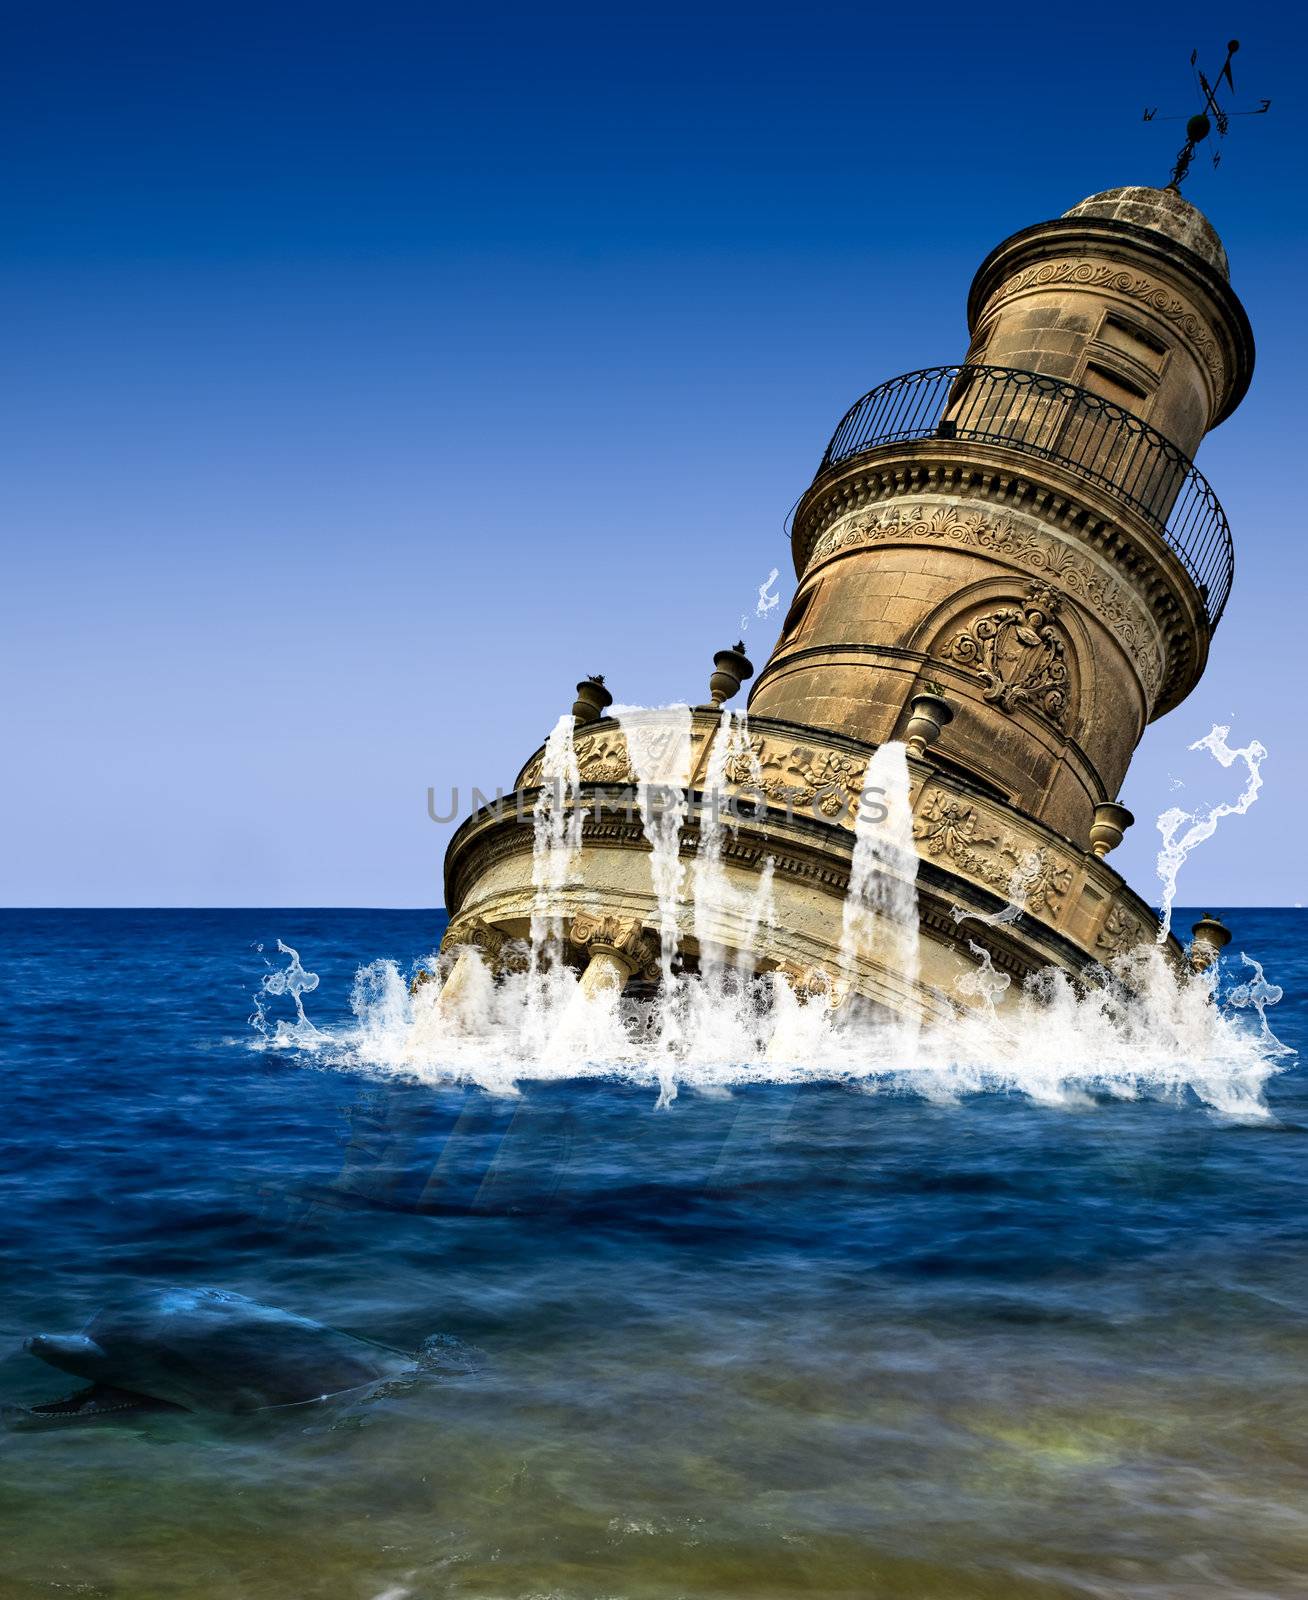 Surreal image showing ancient ruins rise out of the seas